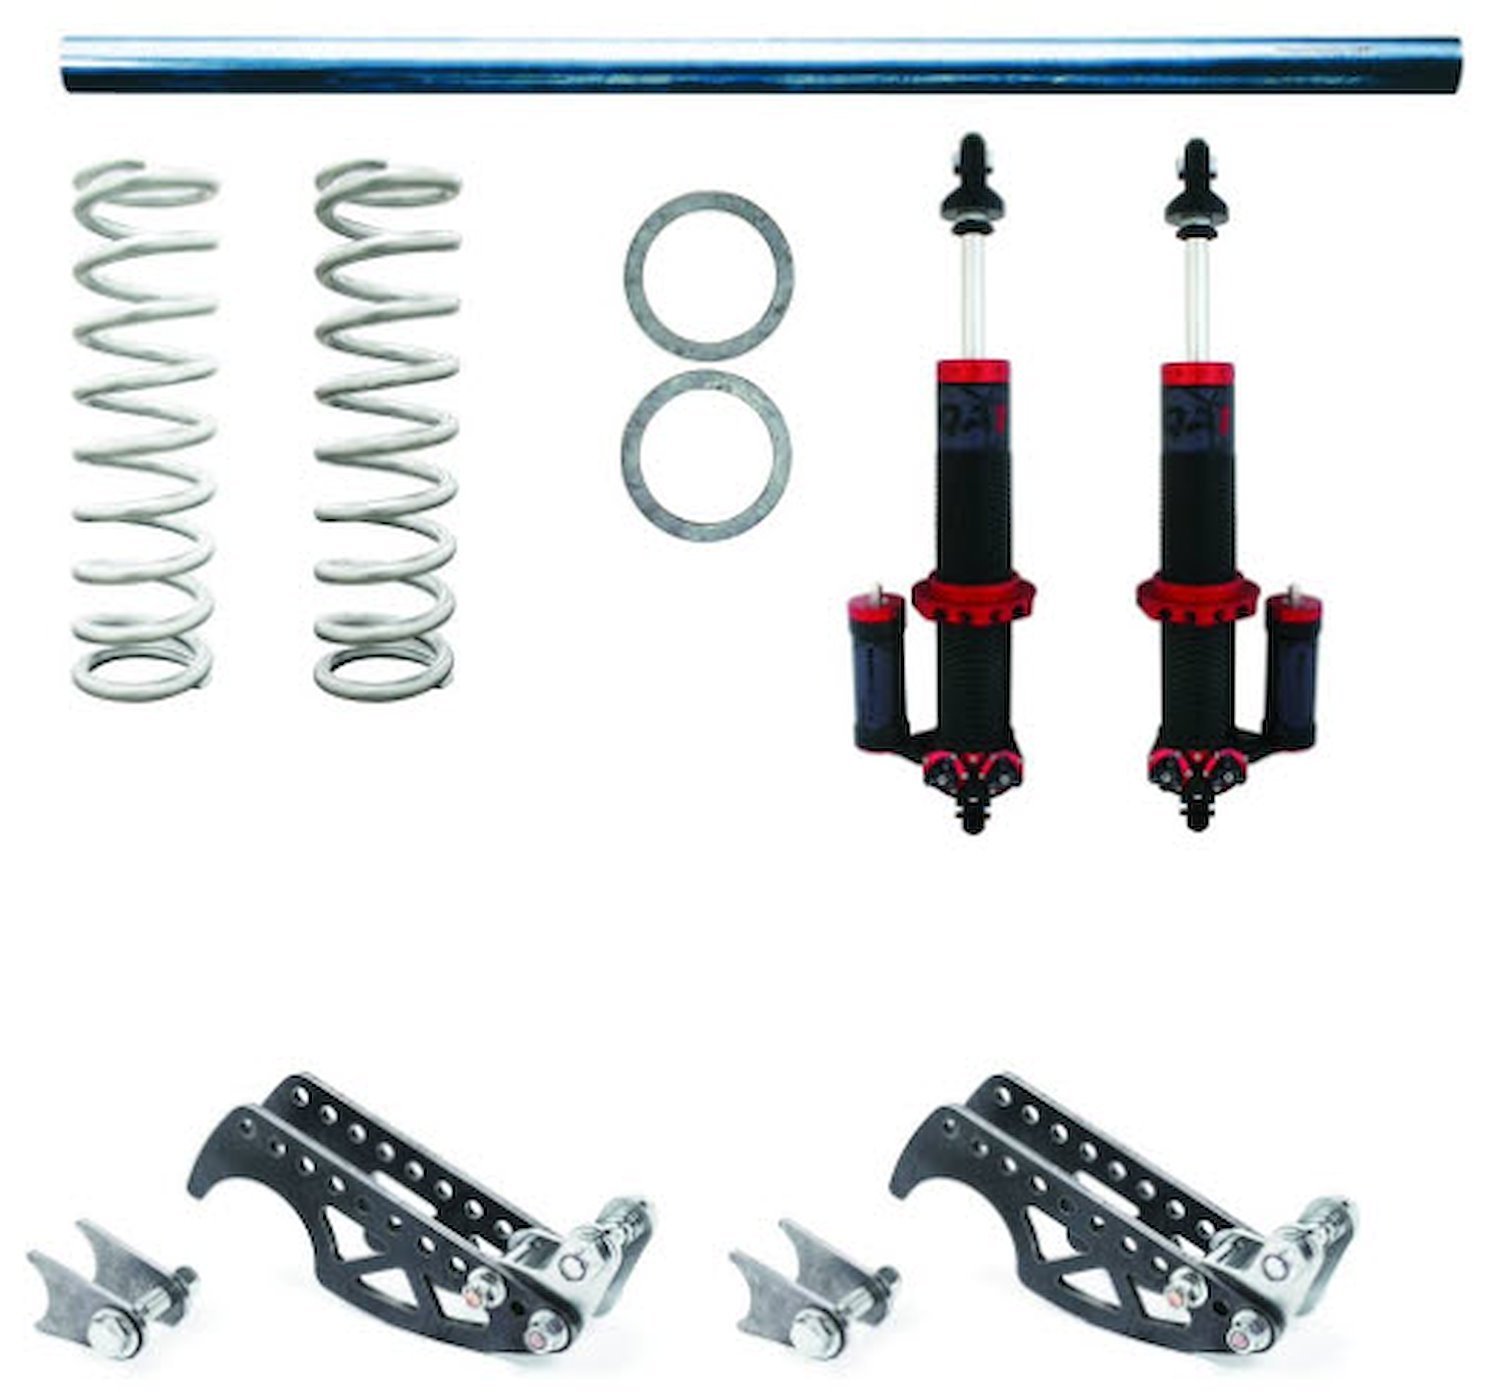 DM501-12250 Heavy-Duty Pro Rear Coil-Over Conversion System for 3 in. Axle Tubes w/MOD-Series Shocks & 250 lb. Springs